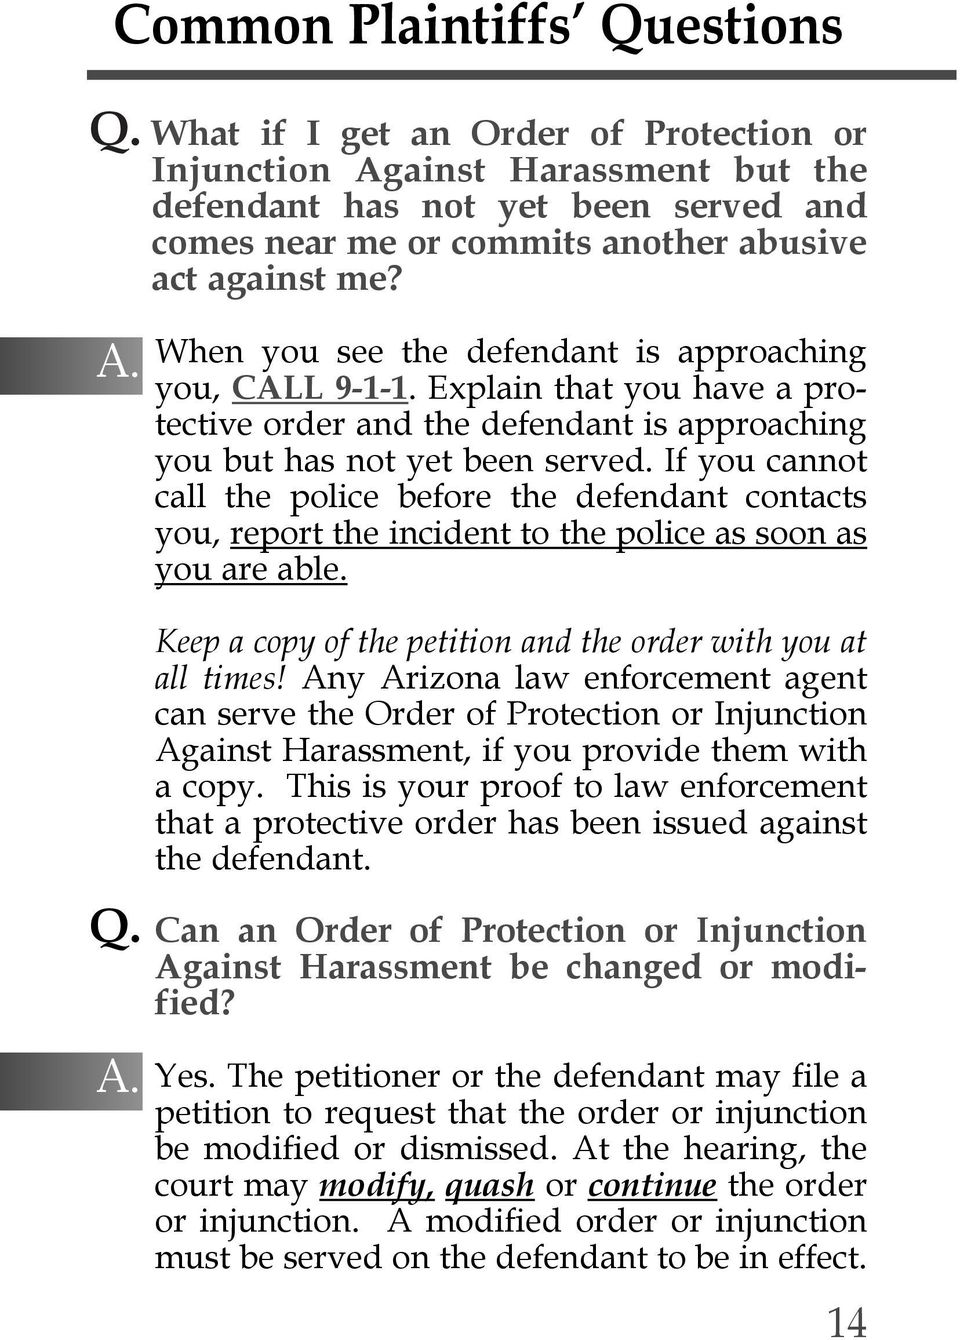 When you see the defendant is approaching you, CALL 9-1-1. Explain that you have a protective order and the defendant is approaching you but has not yet been served.